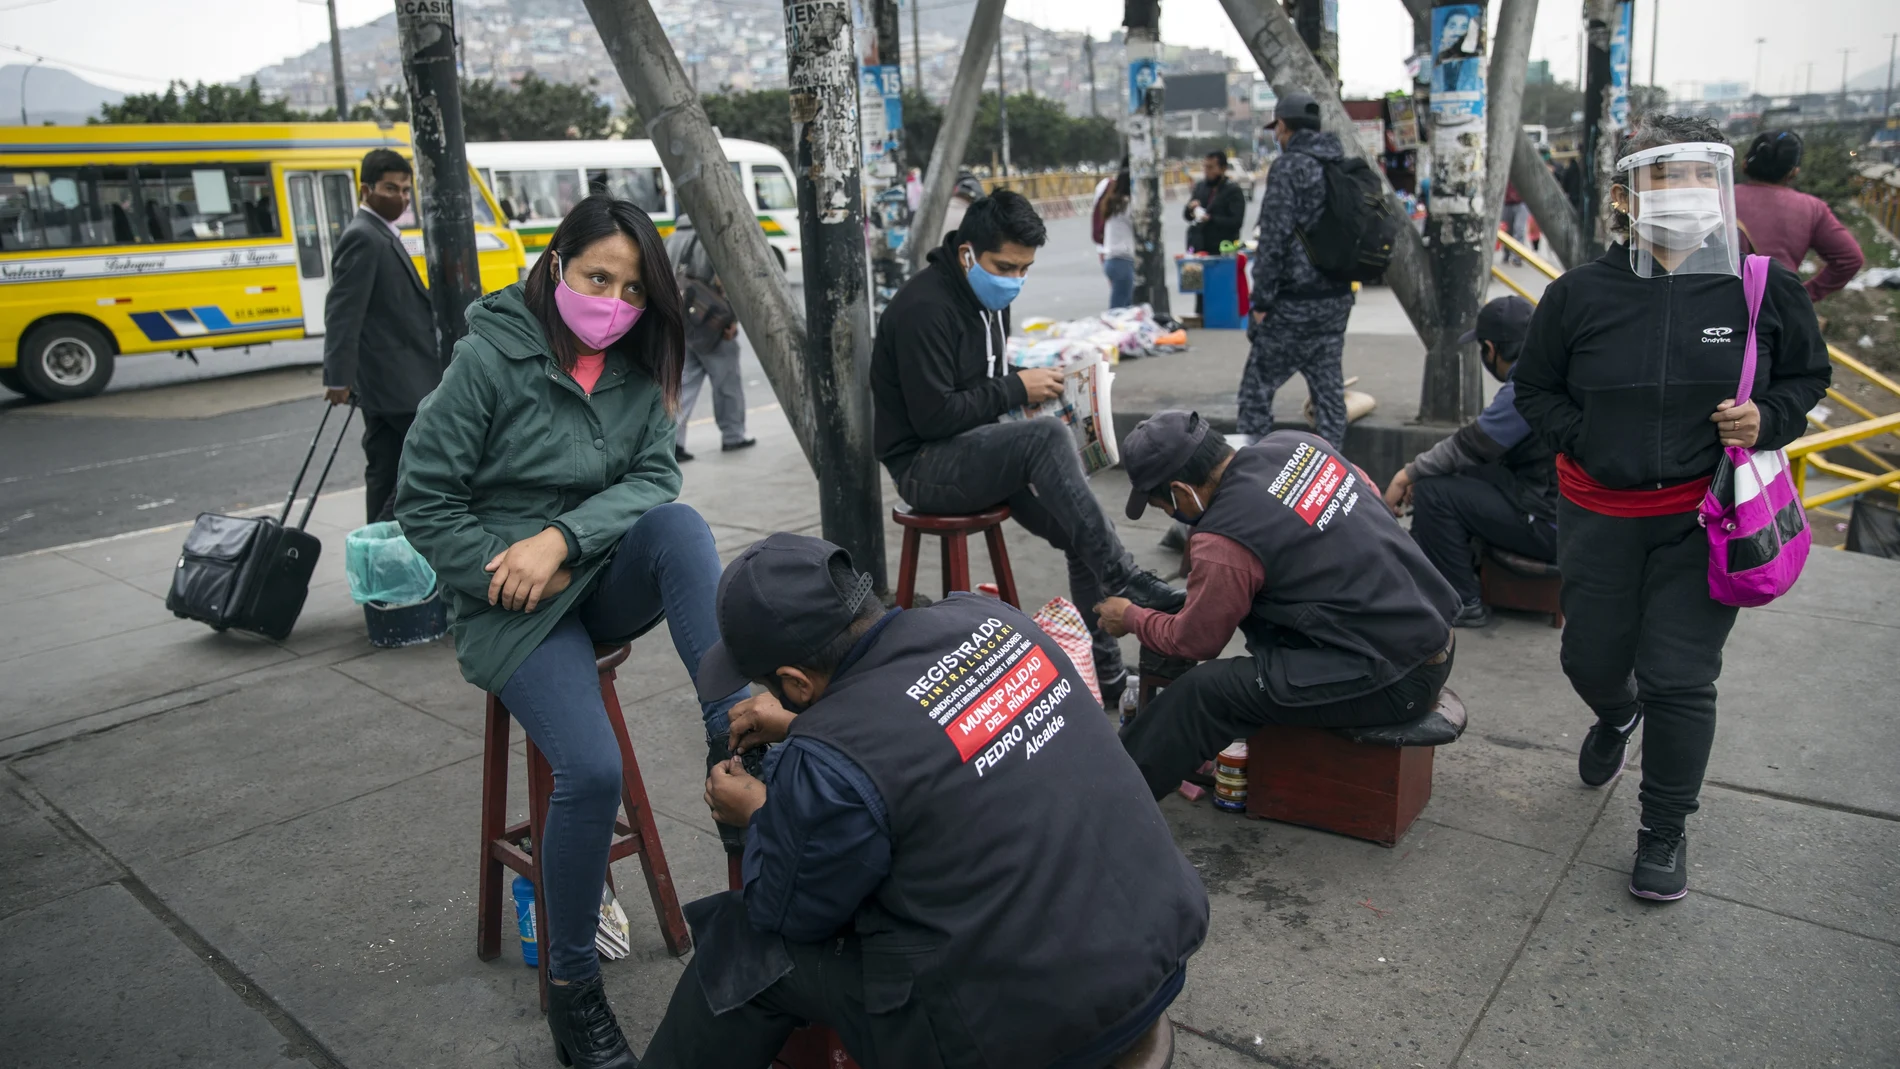 Wearing a mask to curb the spread of the new coronavirus, Daisy Avila Paredes, left, has her boots shined in Lima, Peru, Wednesday, July 1, 2020. (AP Photo/Rodrigo Abd)